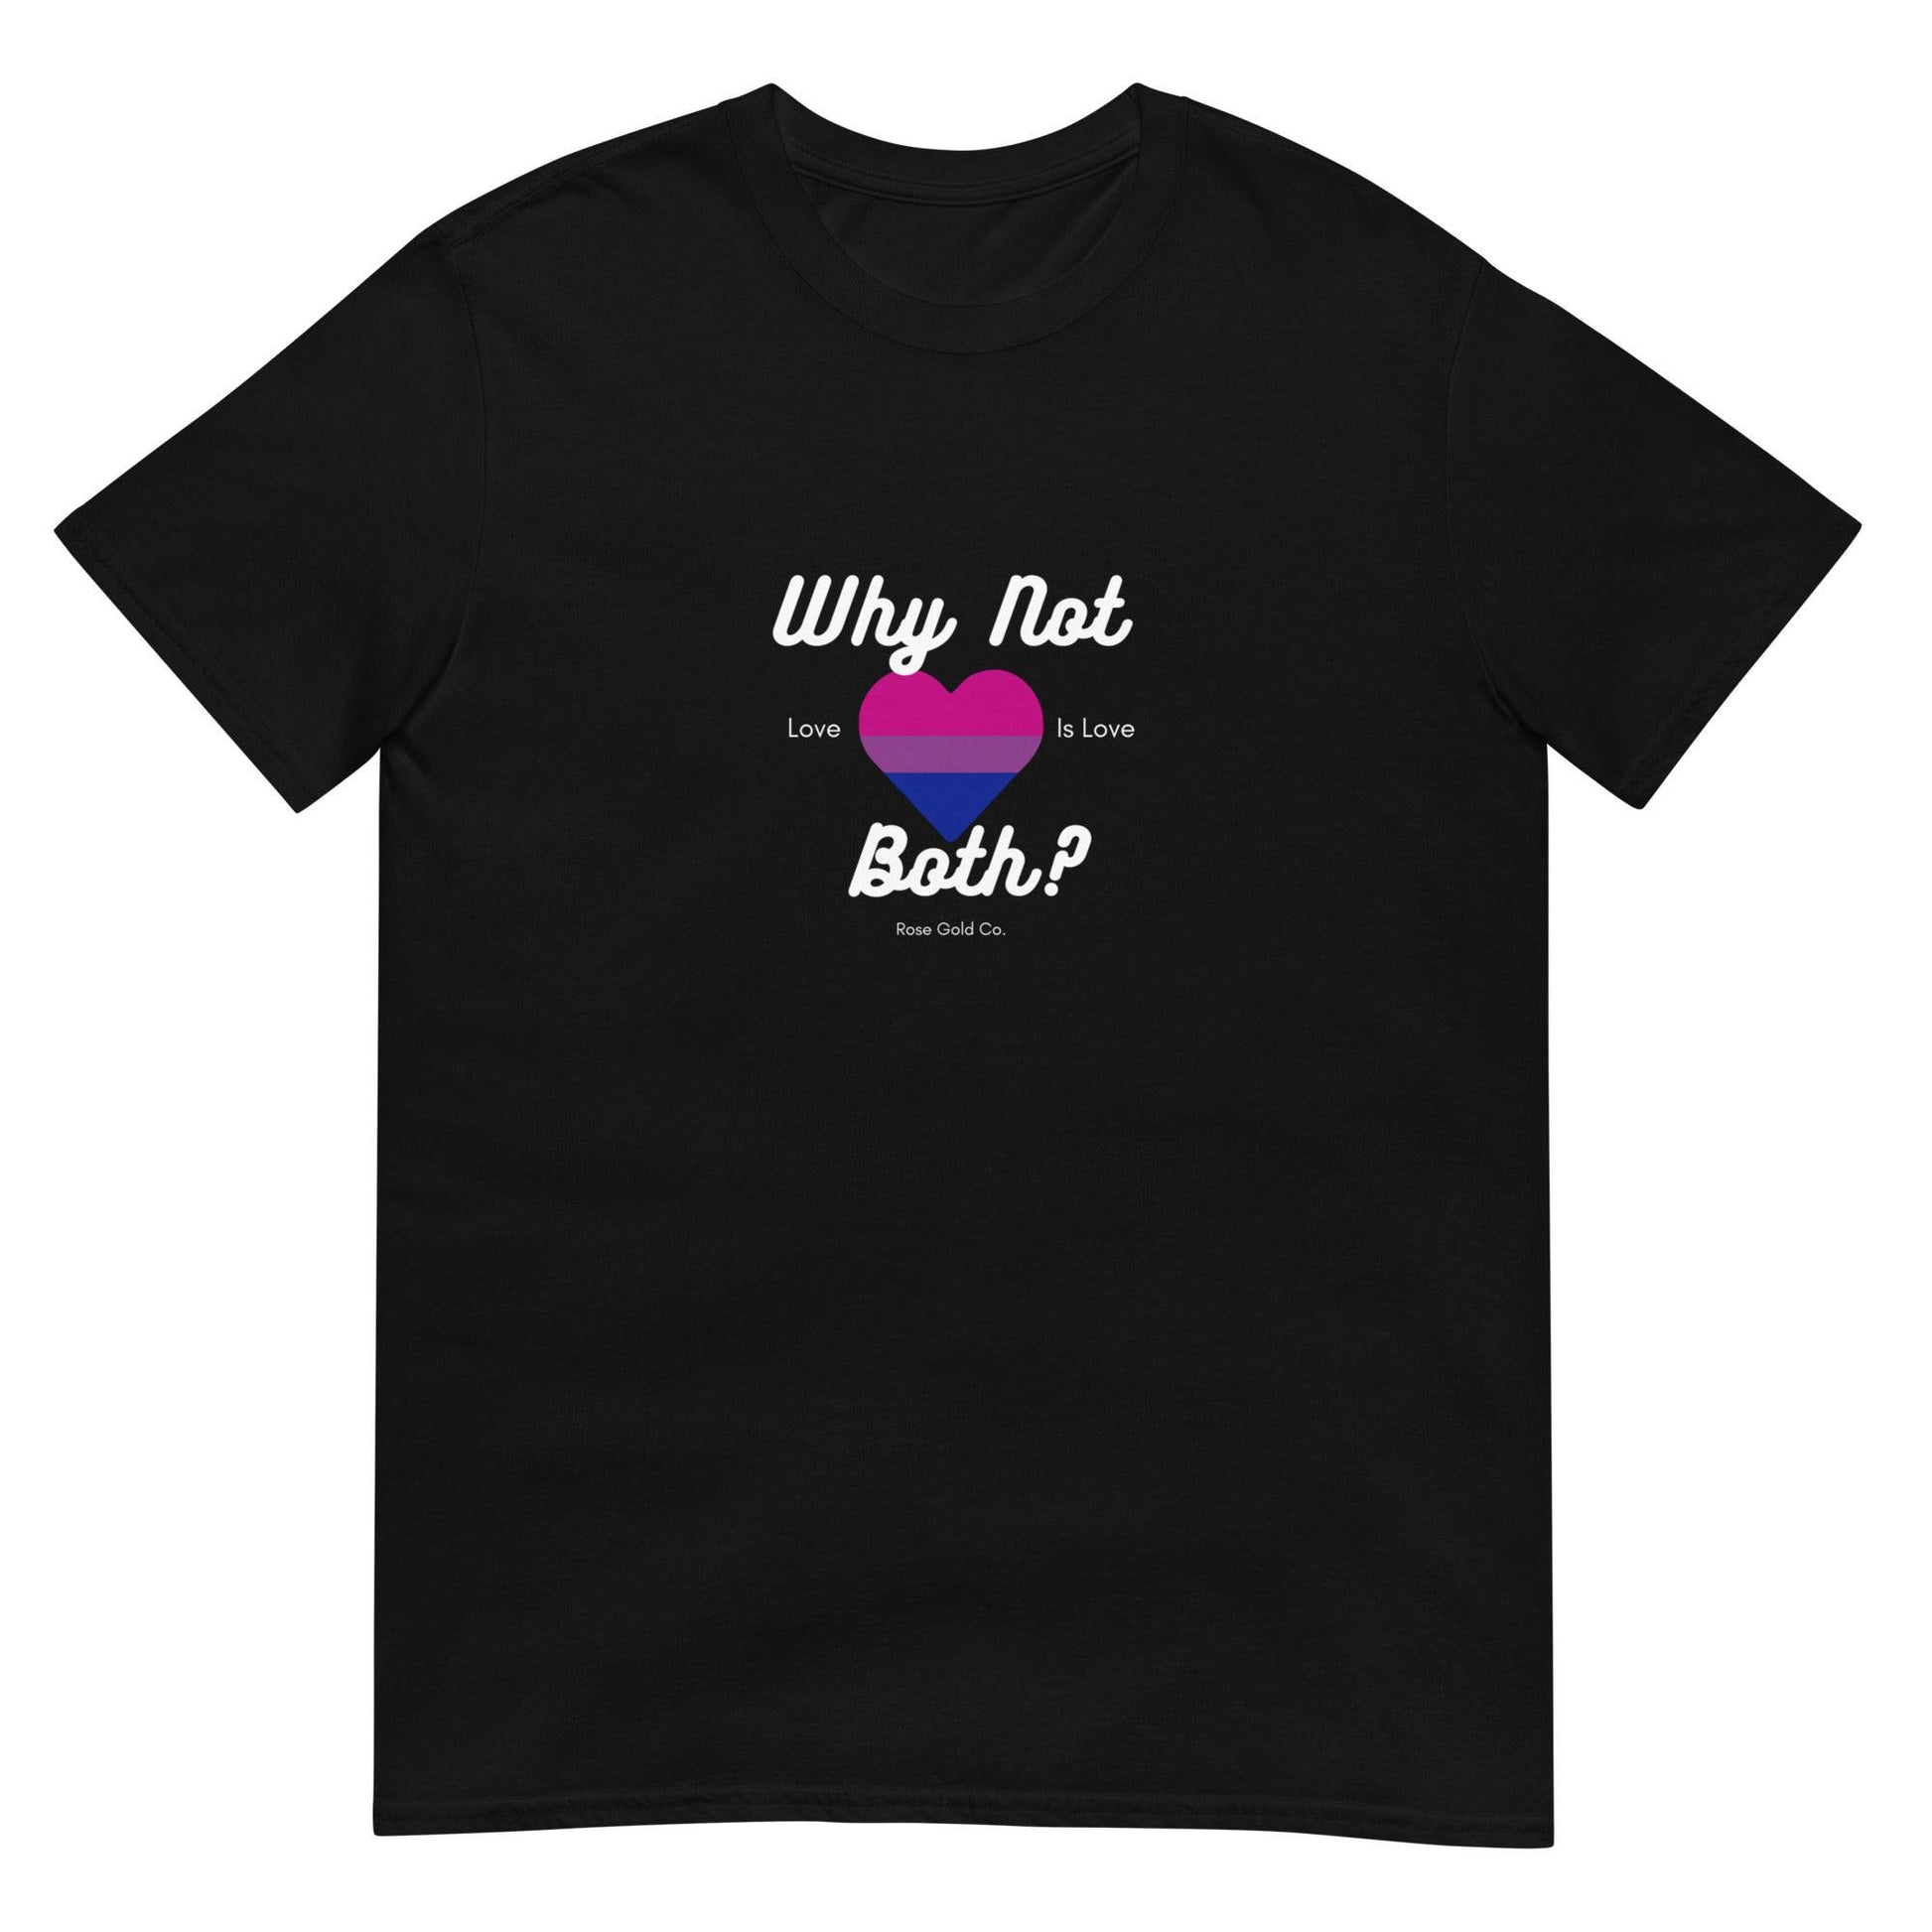 Why Not Both? Bisexual Pride T-Shirt - Rose Gold Co. Shop